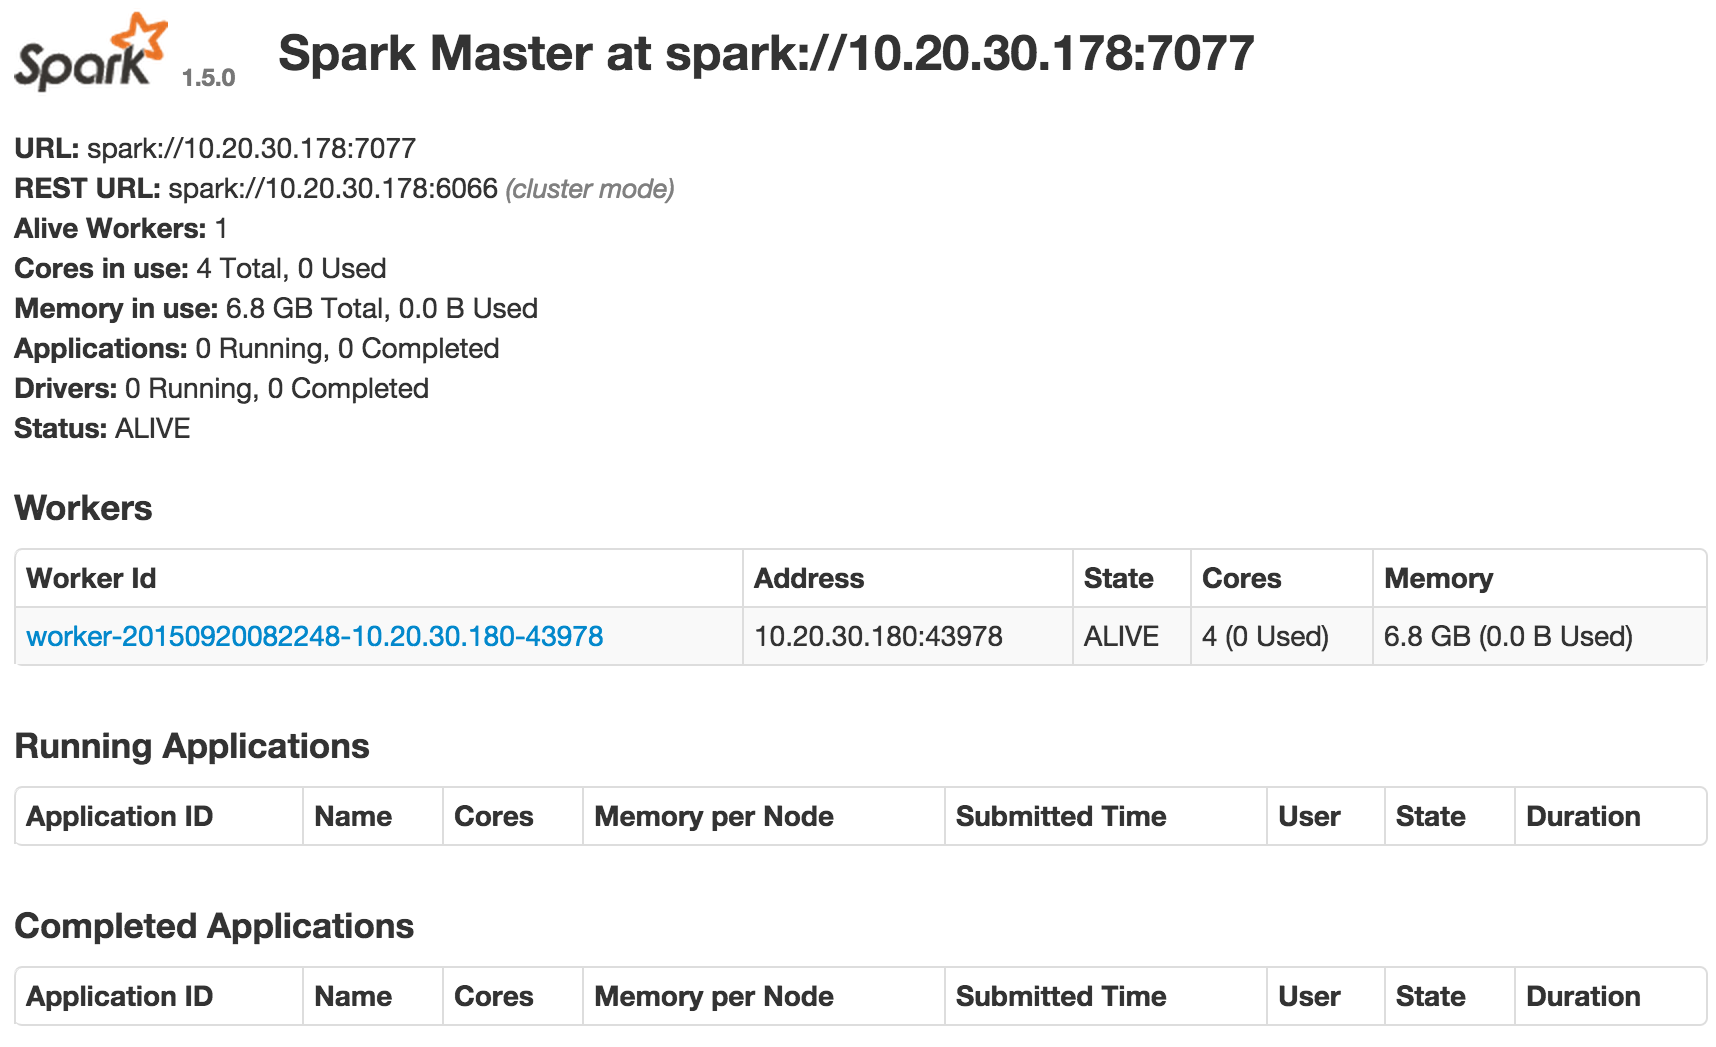 Spark master UI with one worker registered